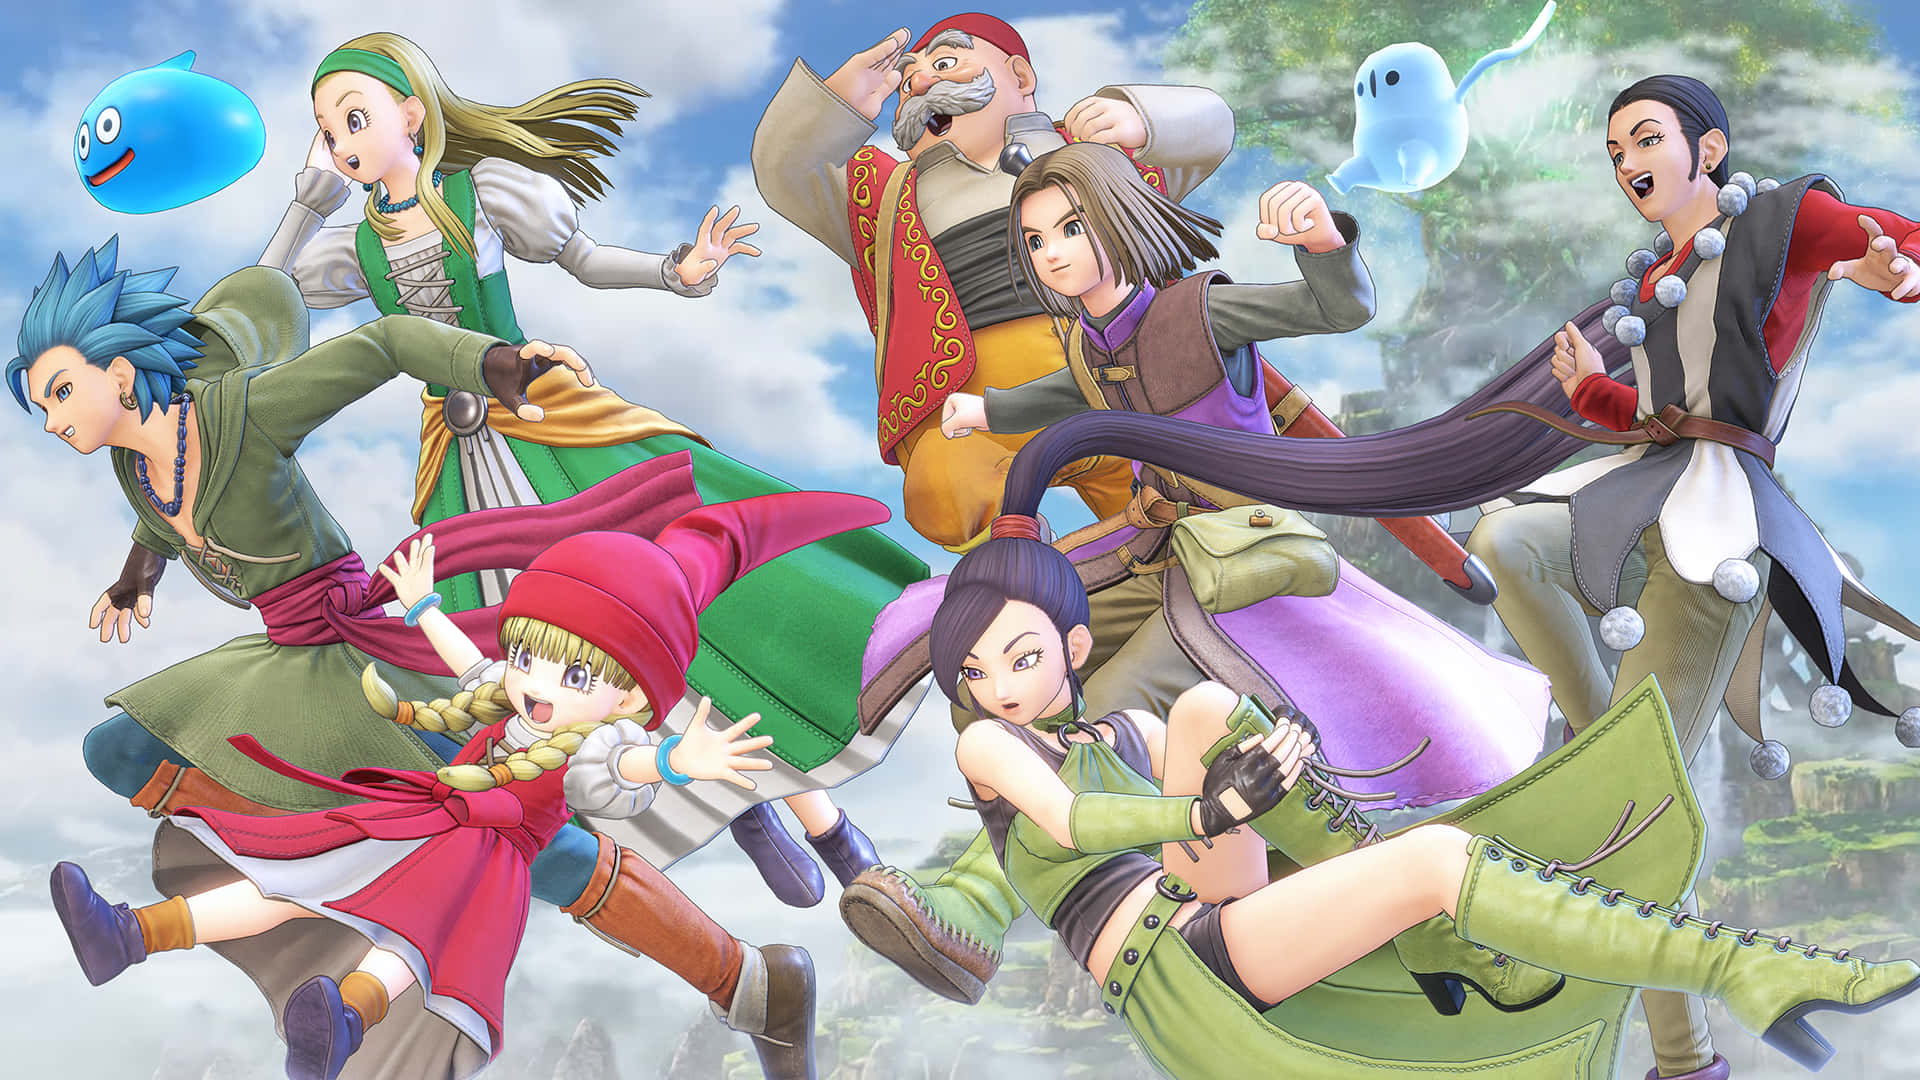 DQ Dragons Den on Twitter Dragon Quest X 7th Anniversary Wallpaper I  have the other sizes at the Den httpstcoCyACkANt9L  httpstcoliLmNsFBfb  Twitter